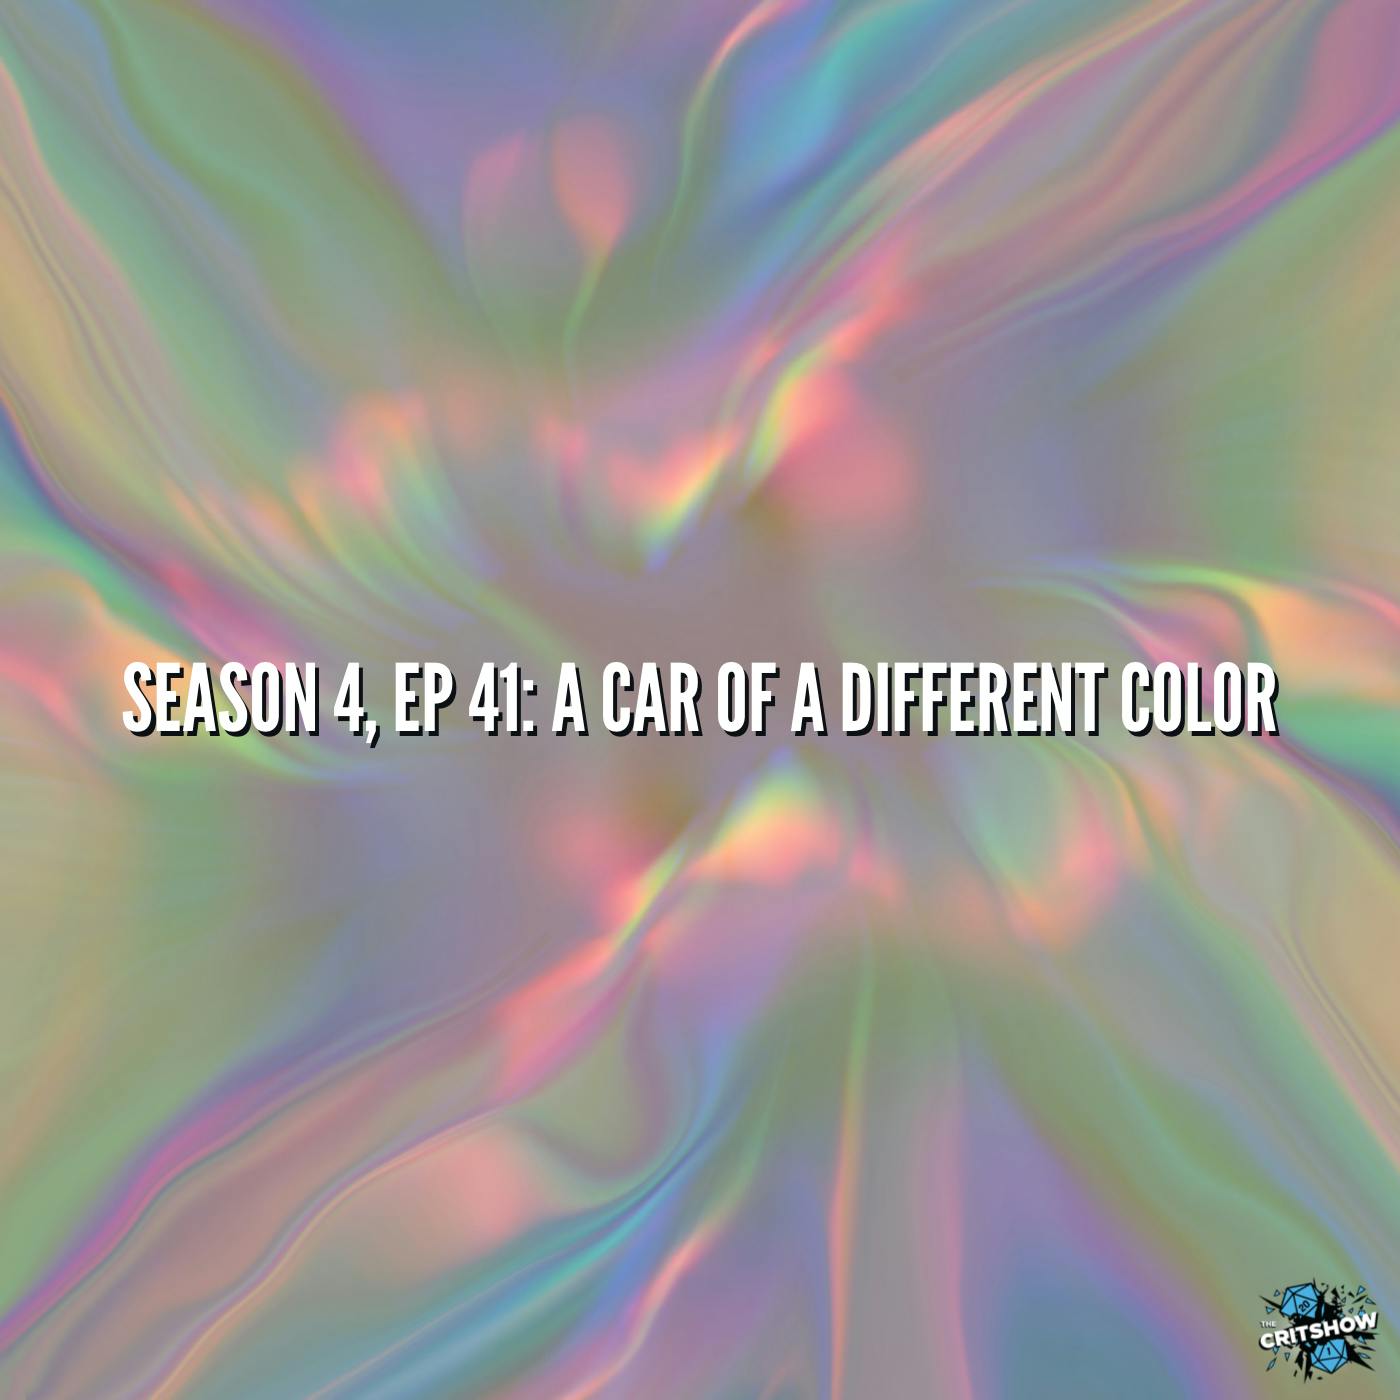 Car of a Different Color (S4, E41)